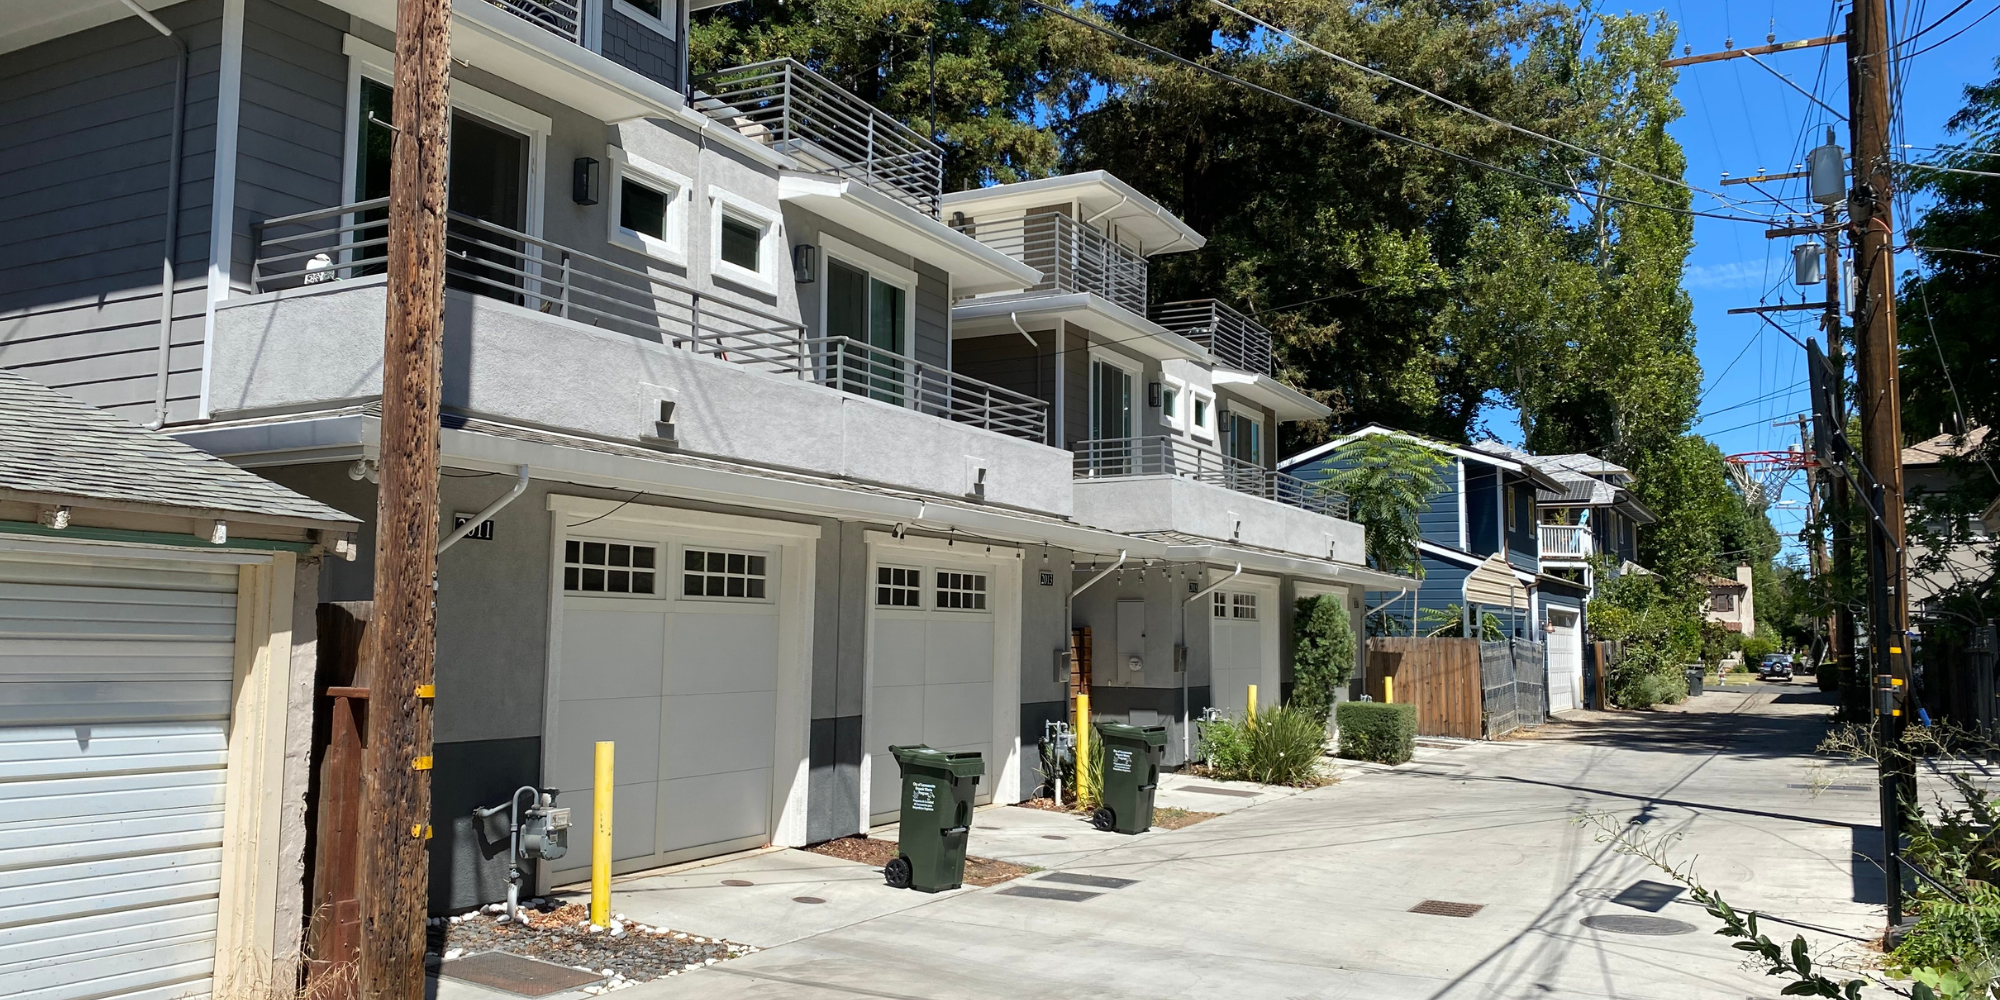 Gentle Density – The Rise of Alley Infill Development